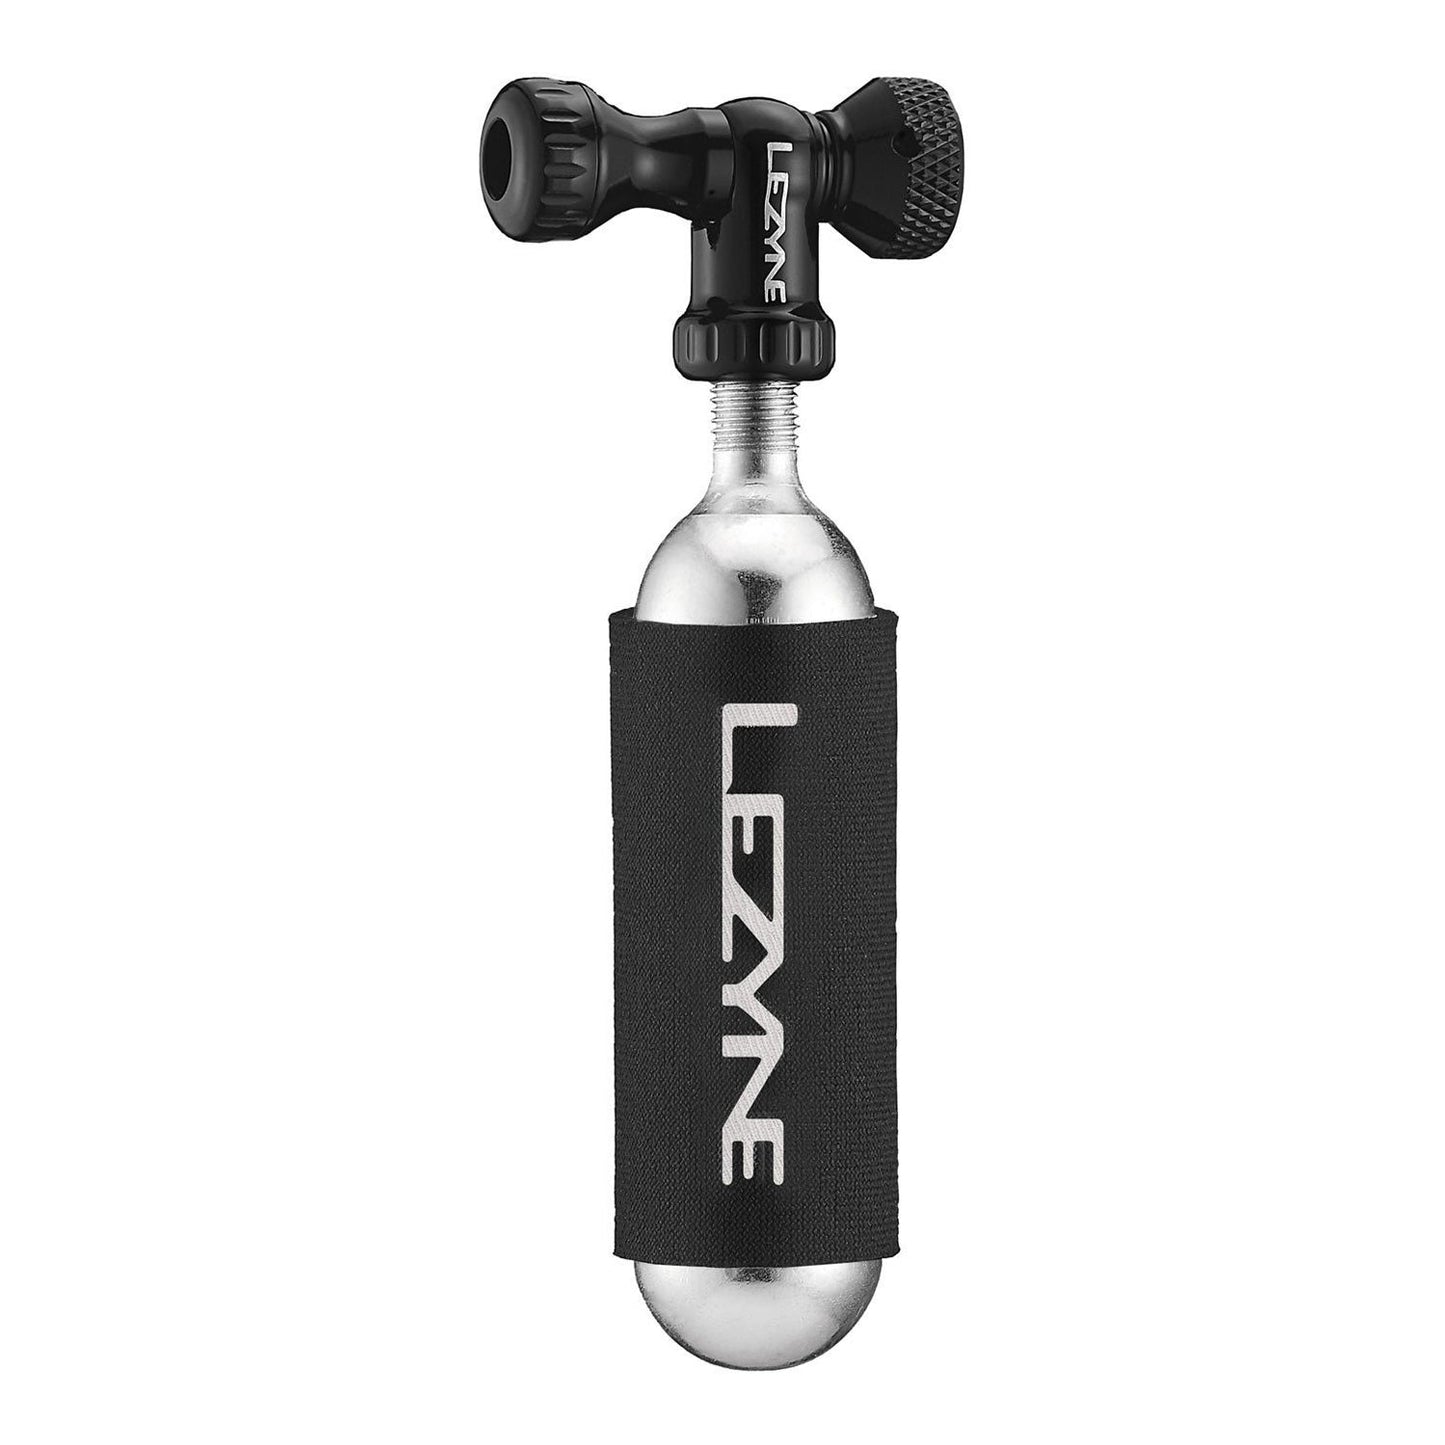 Lezyne Control Drive CO2 Inflator - Black - With 1 x 16g Co2